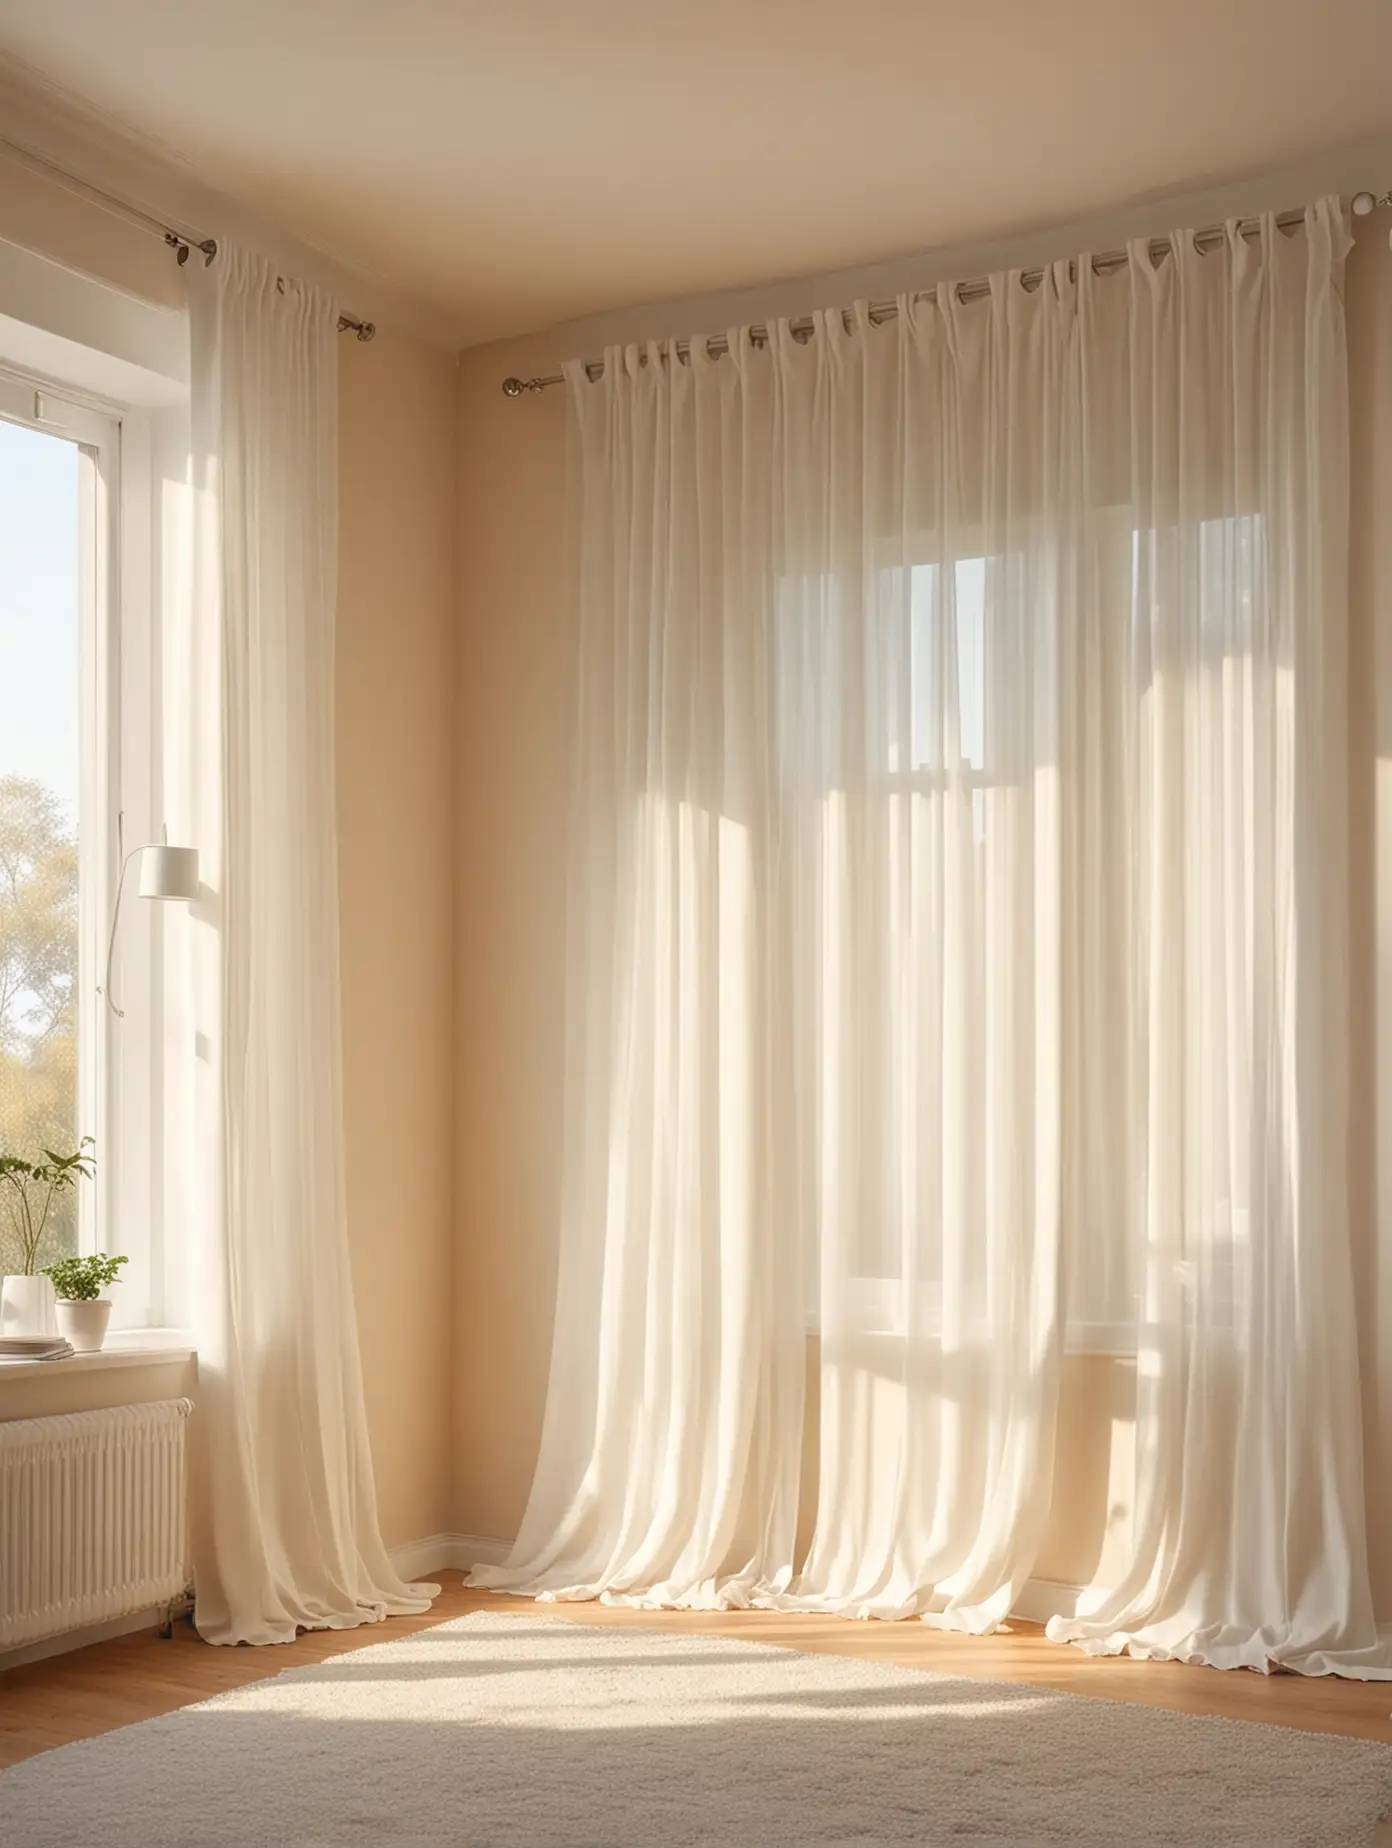 Cozy-Family-Room-with-Warm-Wall-Colors-and-Sunlit-Window-Curtains